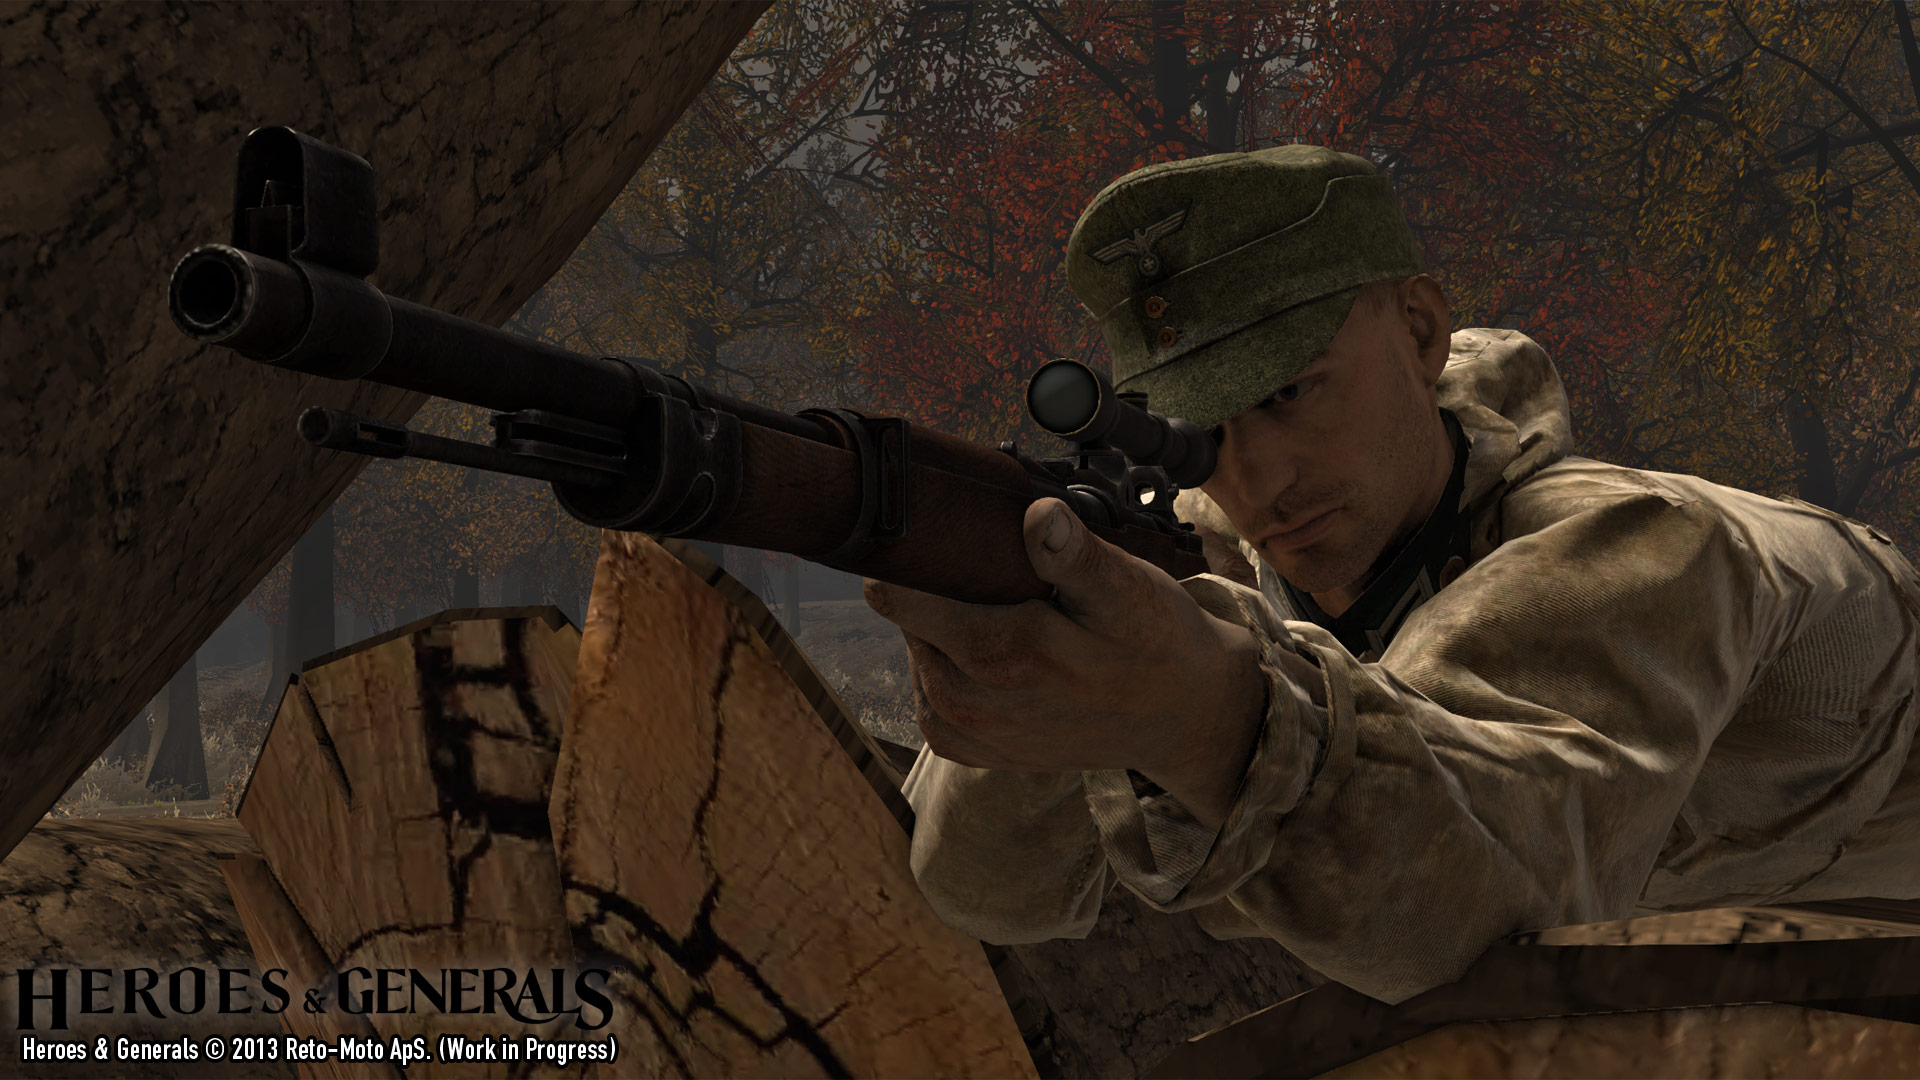 New Heroes Generals Gameplay Trailer Focuses On Roles Players Can